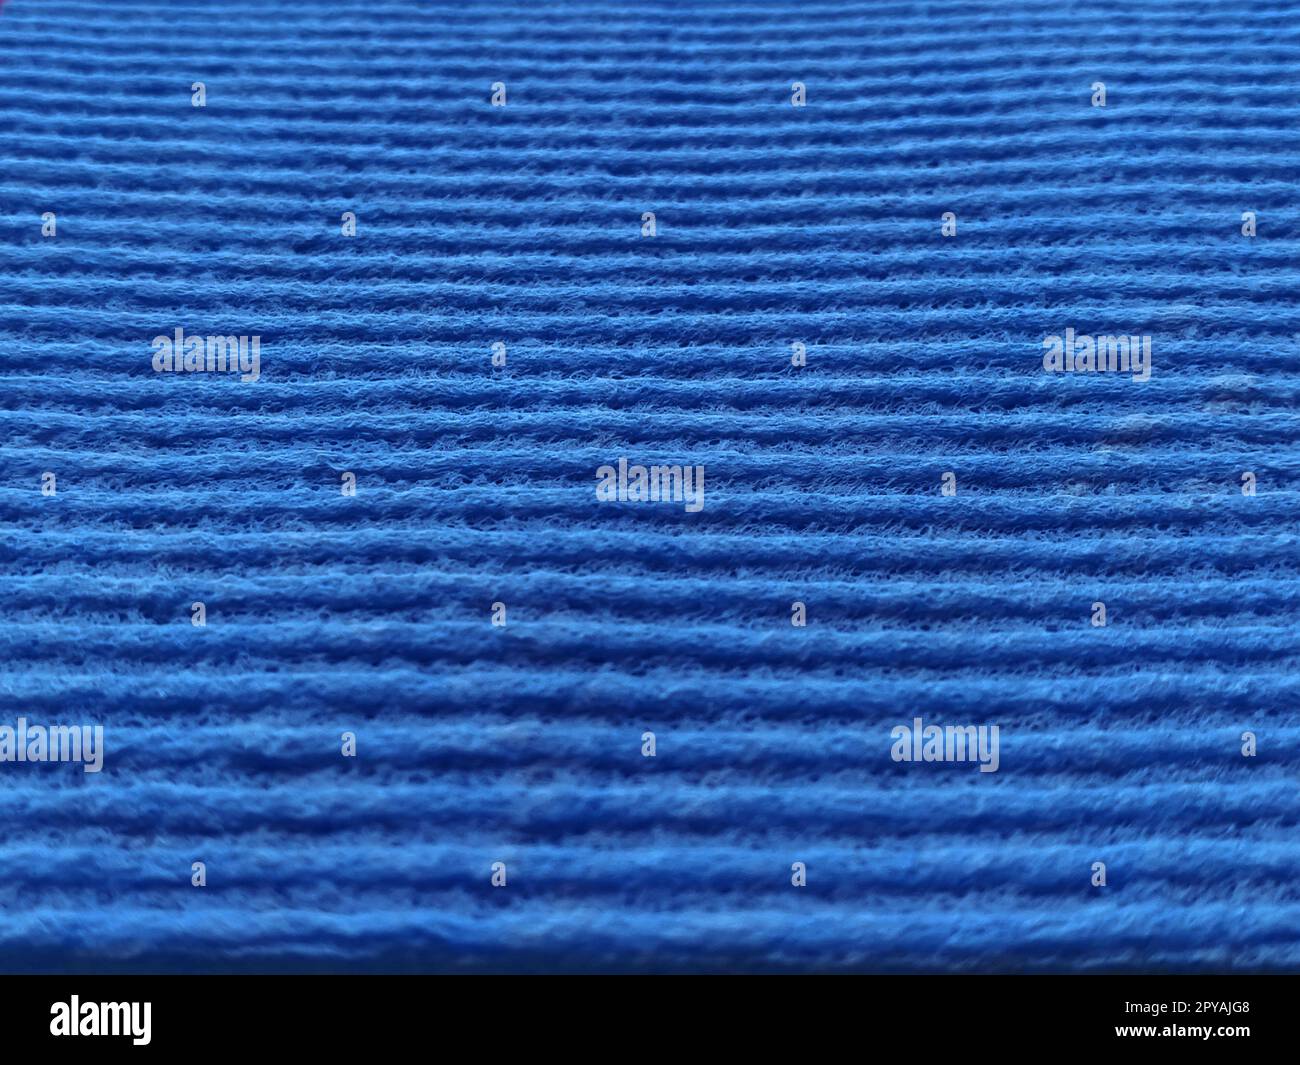 Blue striped ribbed fabric. Close-up shot of a dish washing sponge or microfiber cloth. Blur around the edges Stock Photo